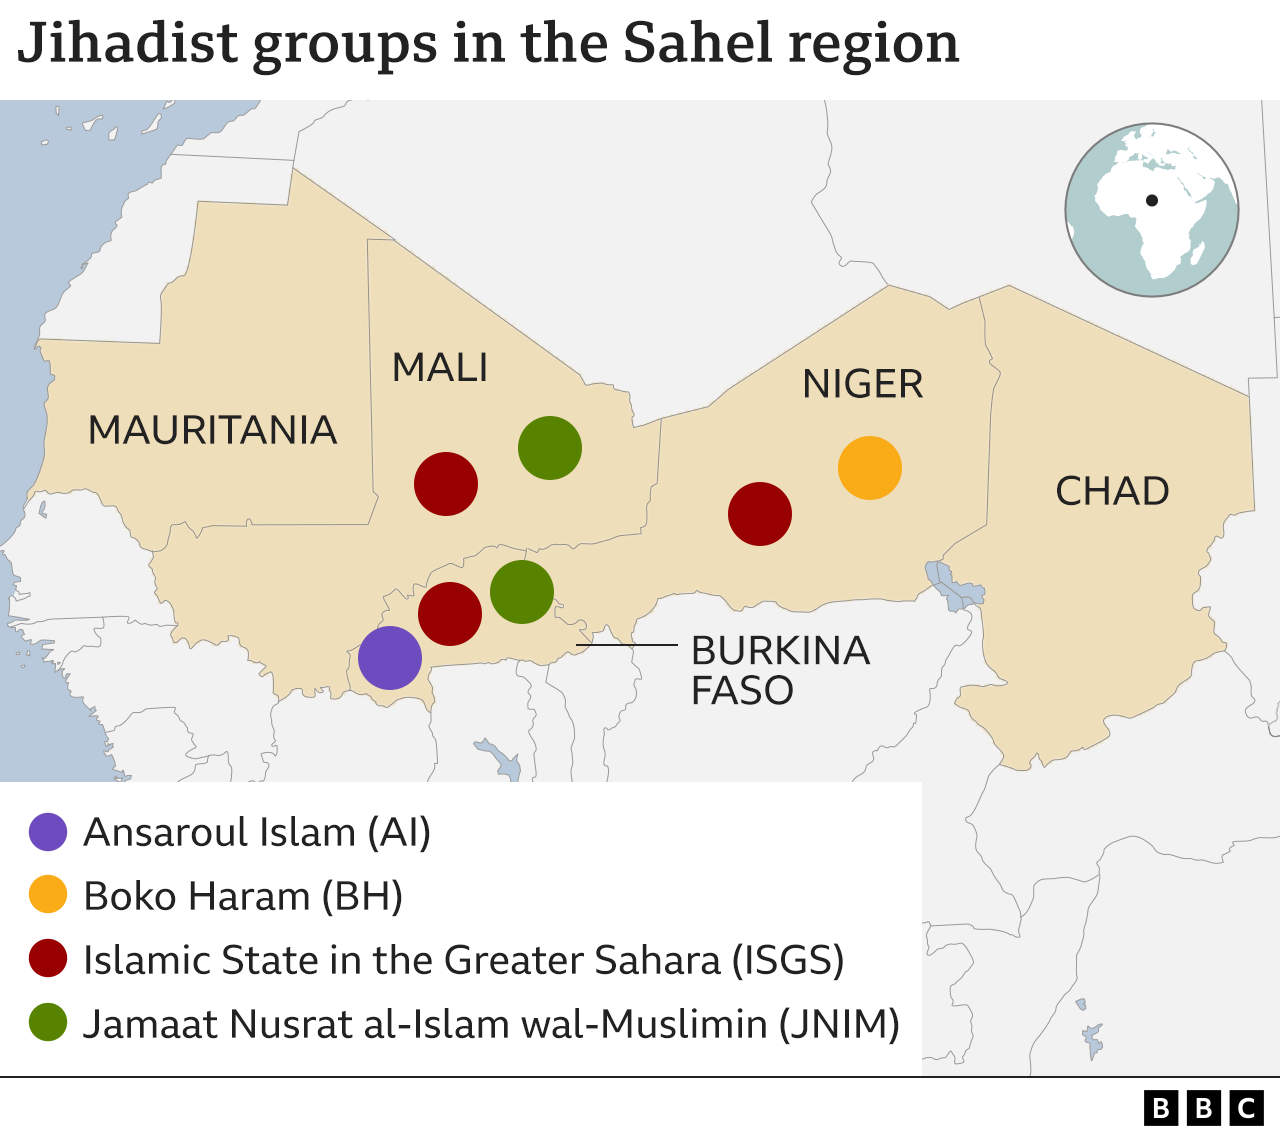 Map of the Sahel region in North Africa with an indication of which Jihadist groups operate in each country